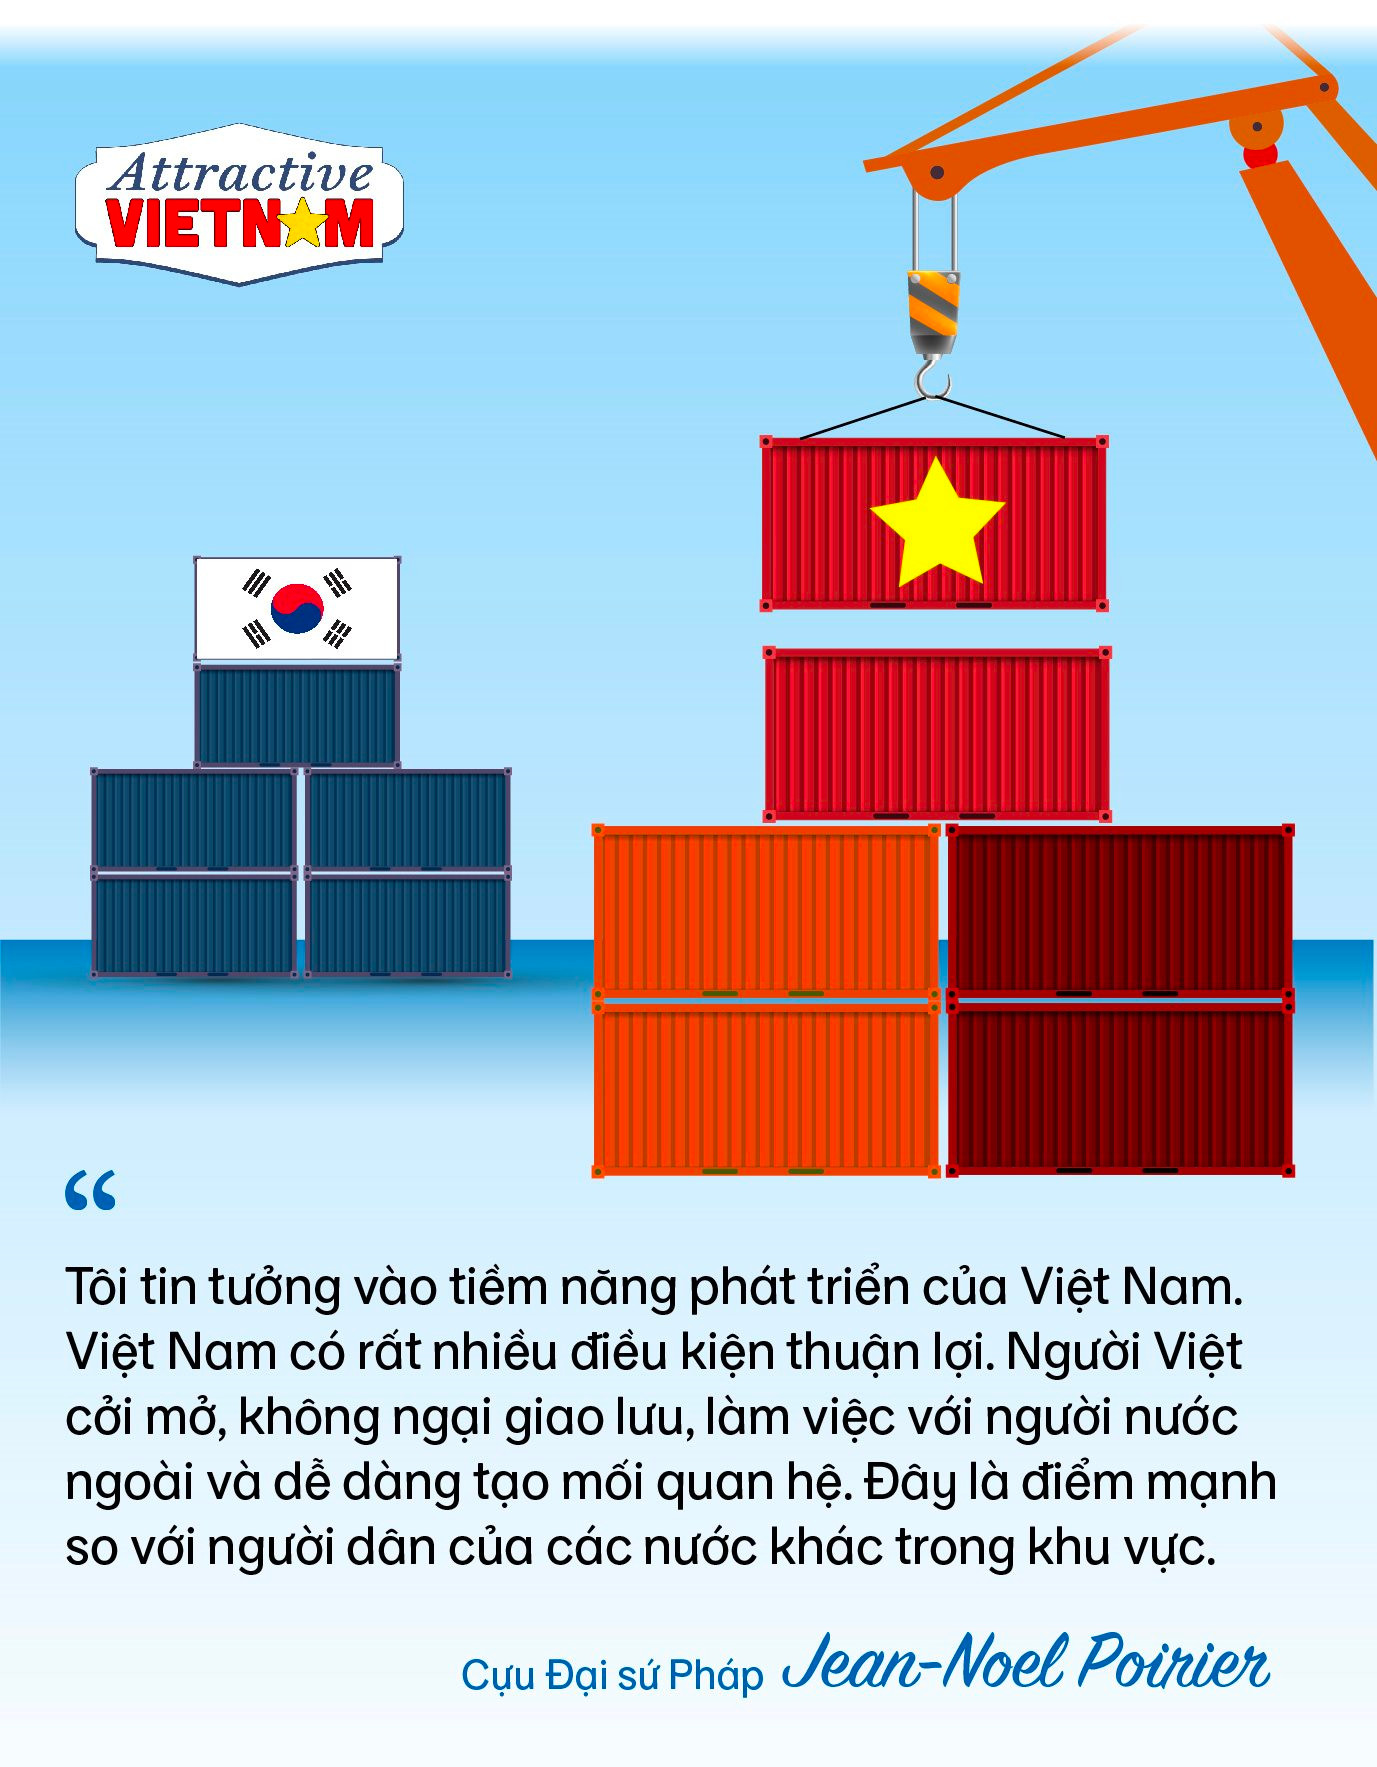 vn-quote-3-web.jpg